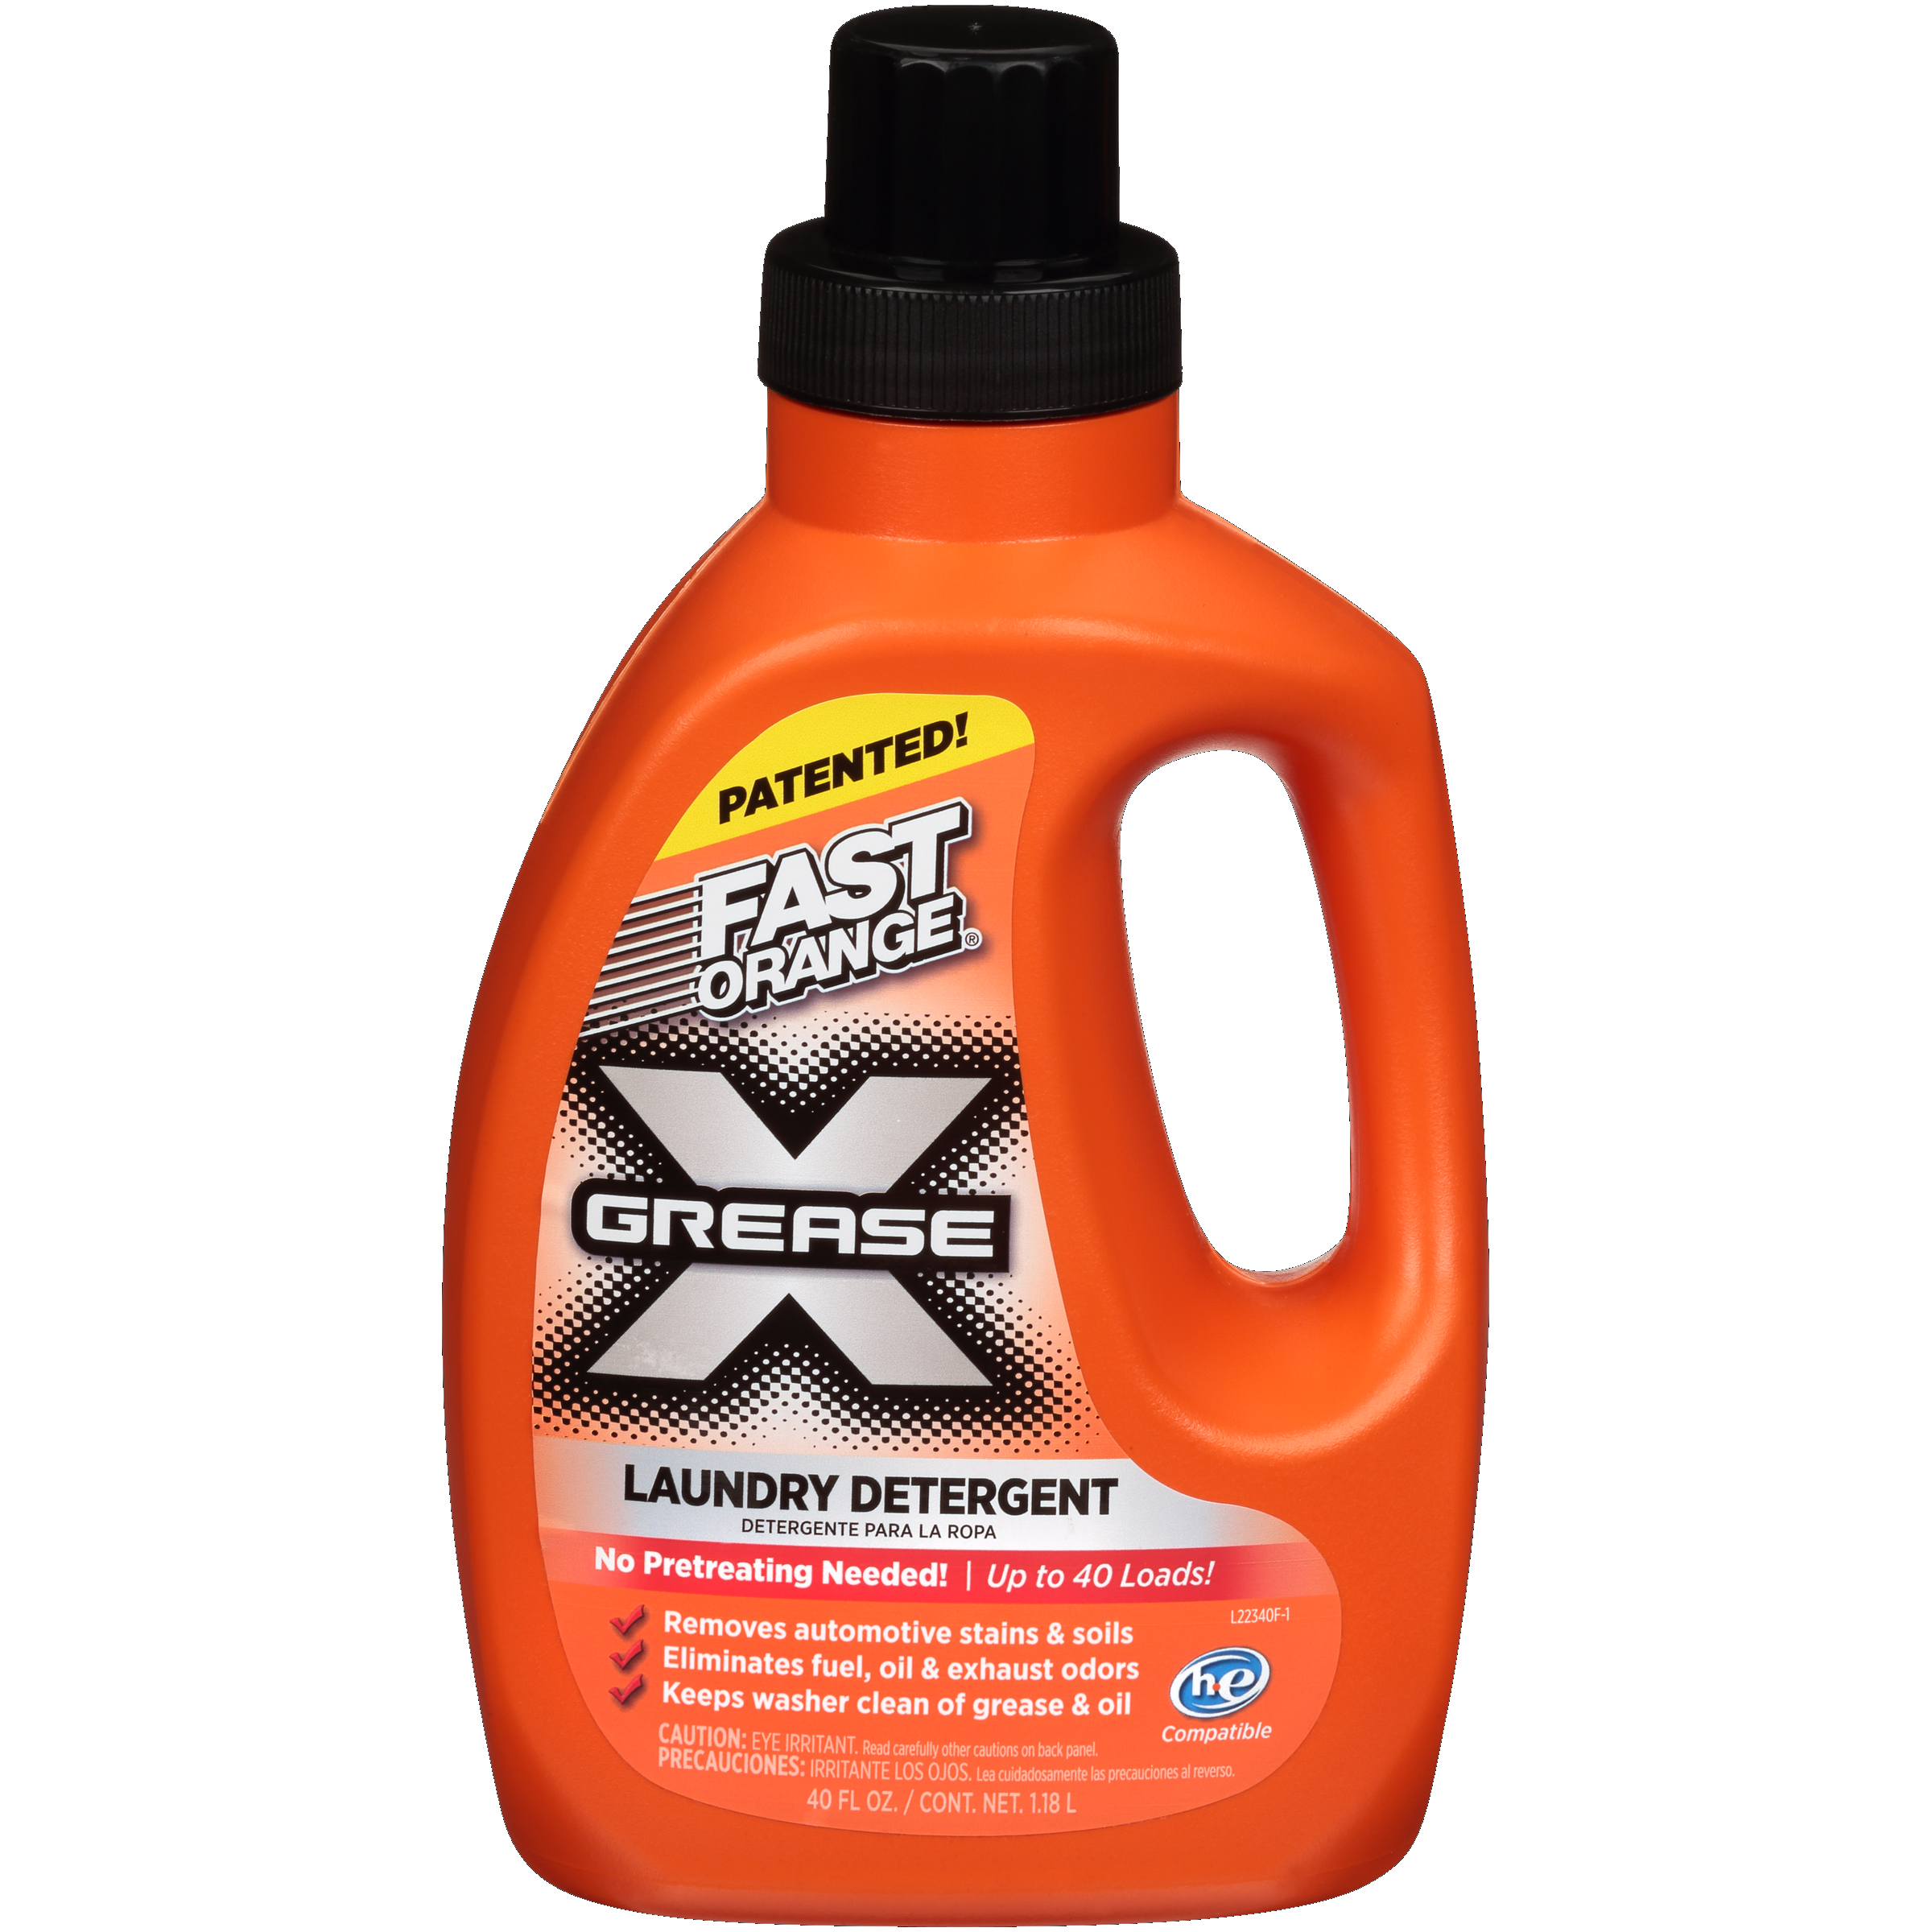 Fast Orange<span class="sup">®</span> Grease X Laundry Detergent